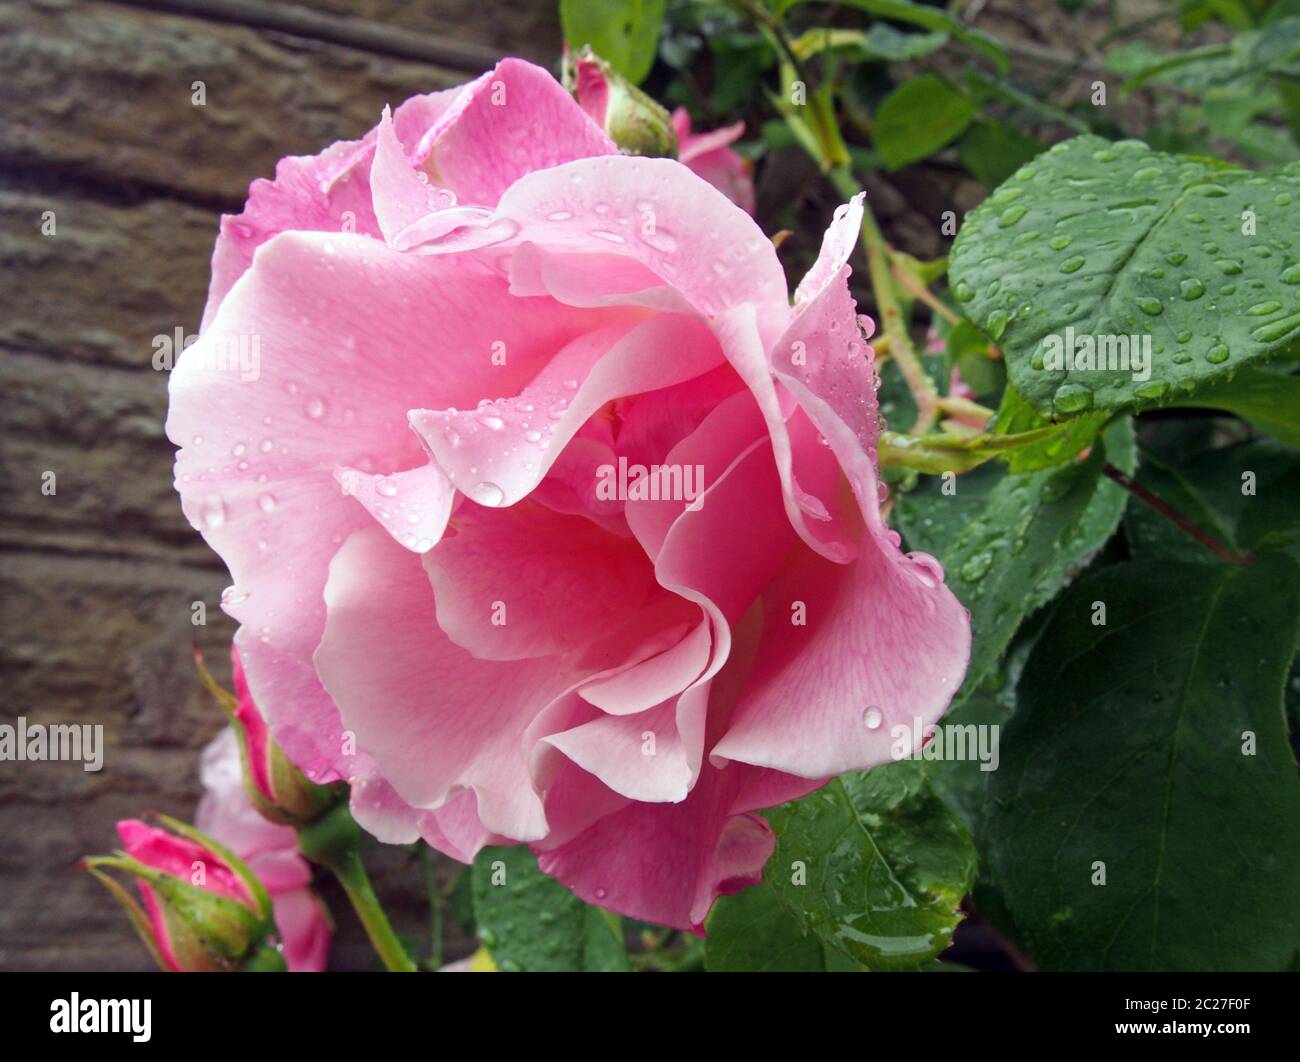 large pink roses in bloom and budding covered in raindrops climbing up a stone wall in a garden Stock Photo